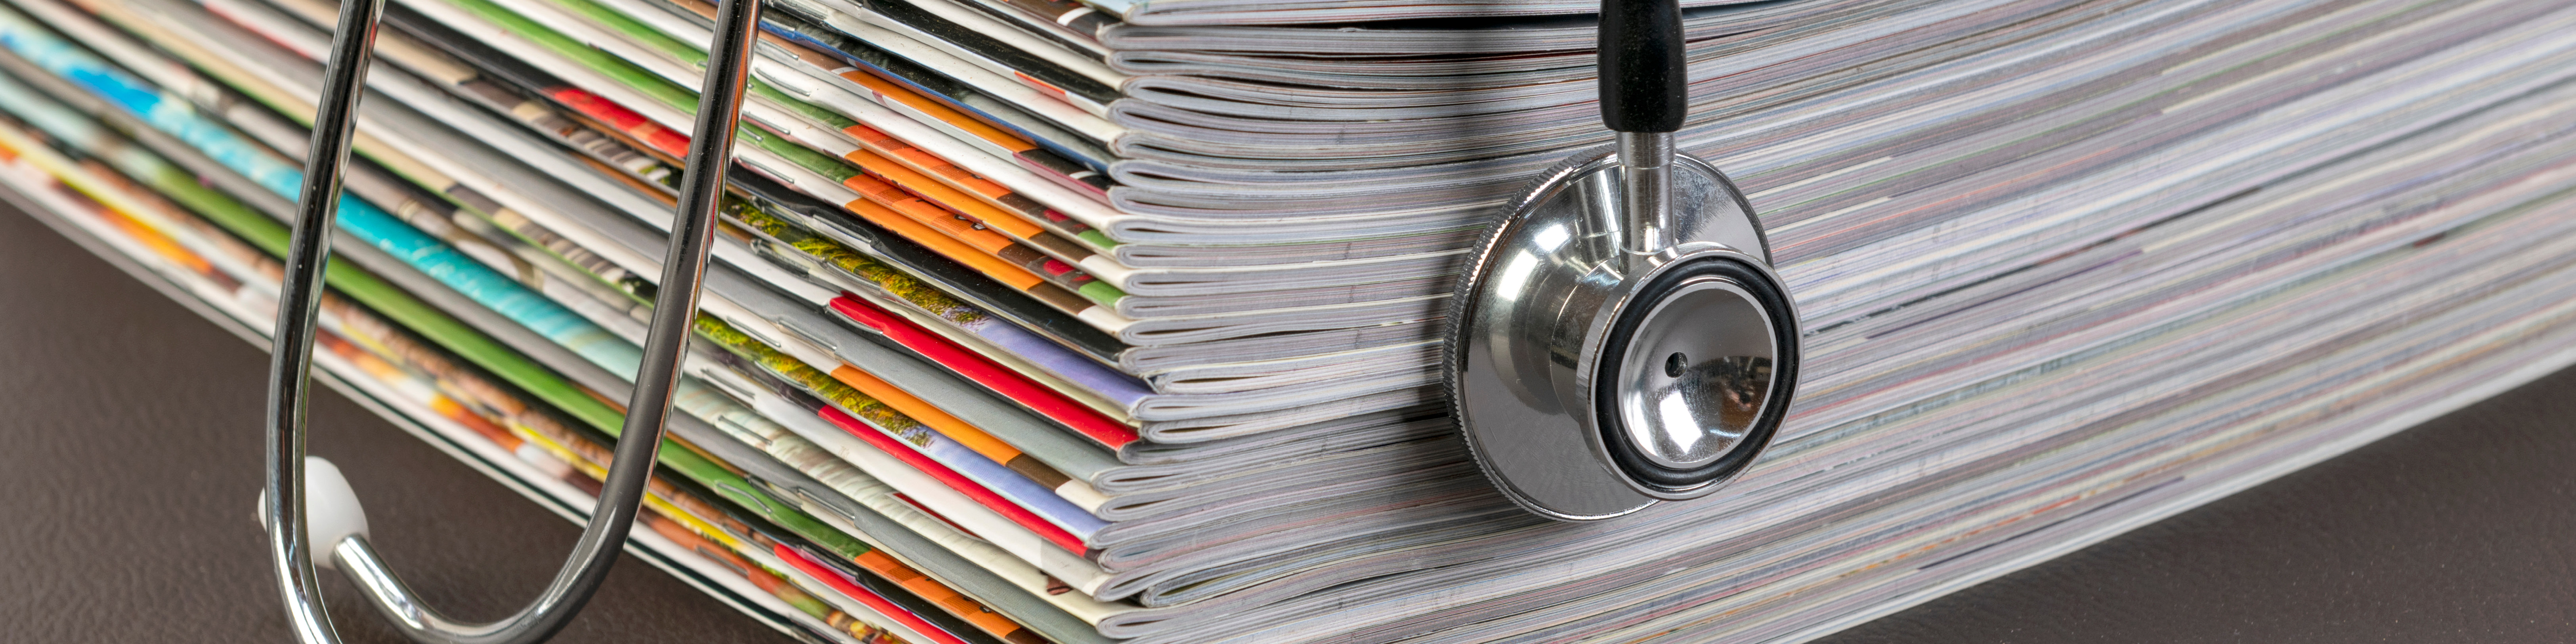 stack of magazines with a stethoscope sitting on top of it